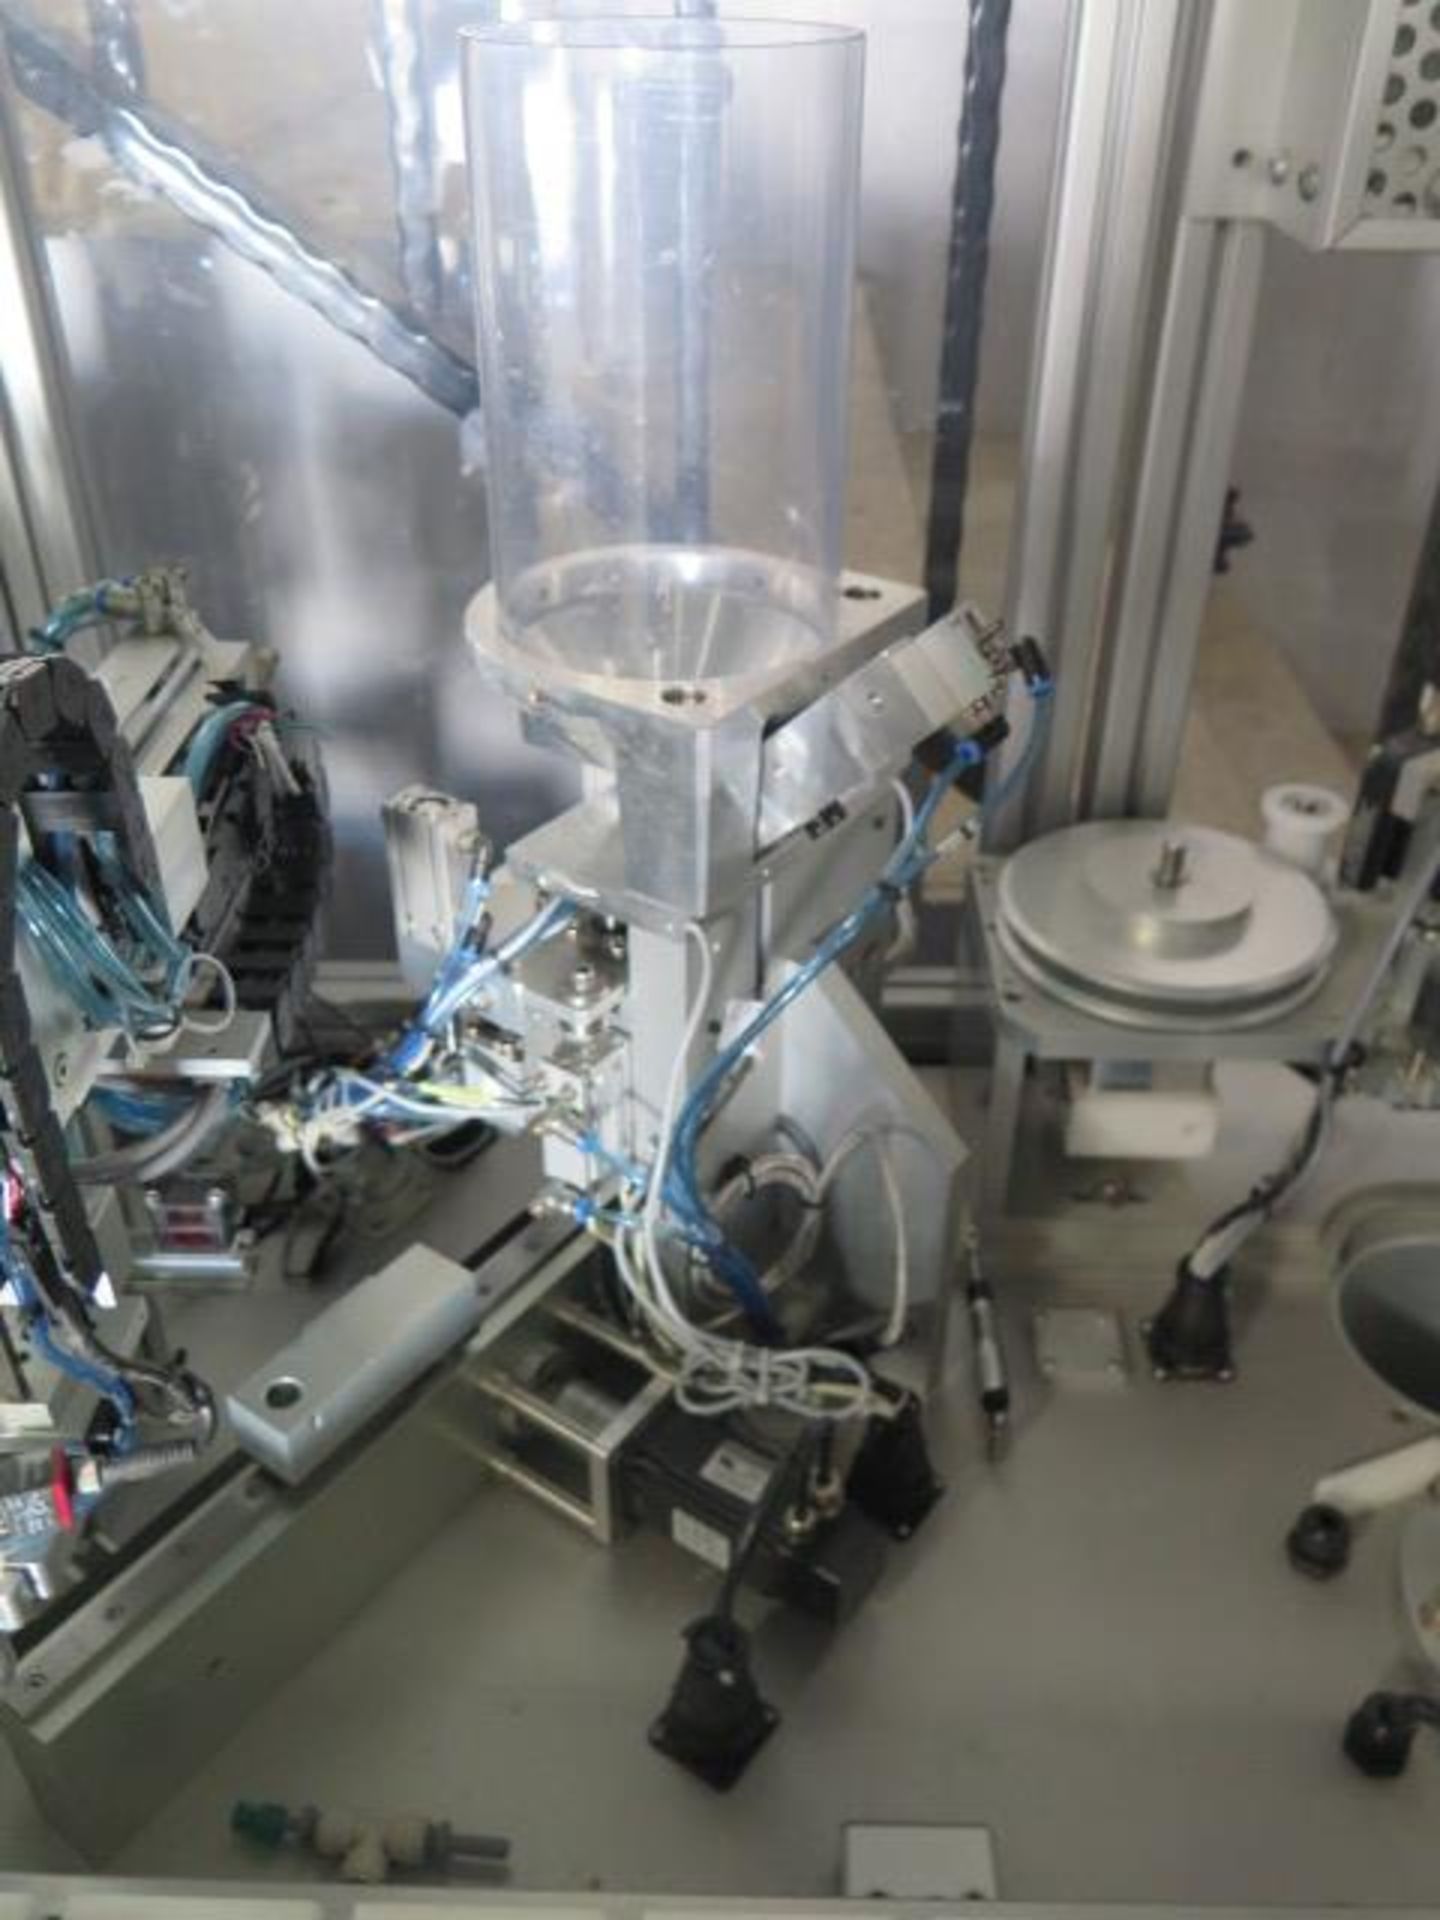 Automated Vitamin D Machine Line w/ PLC Controls, Tube and Cap Feeders, Enclosure SOLD AS-IS - Image 15 of 20